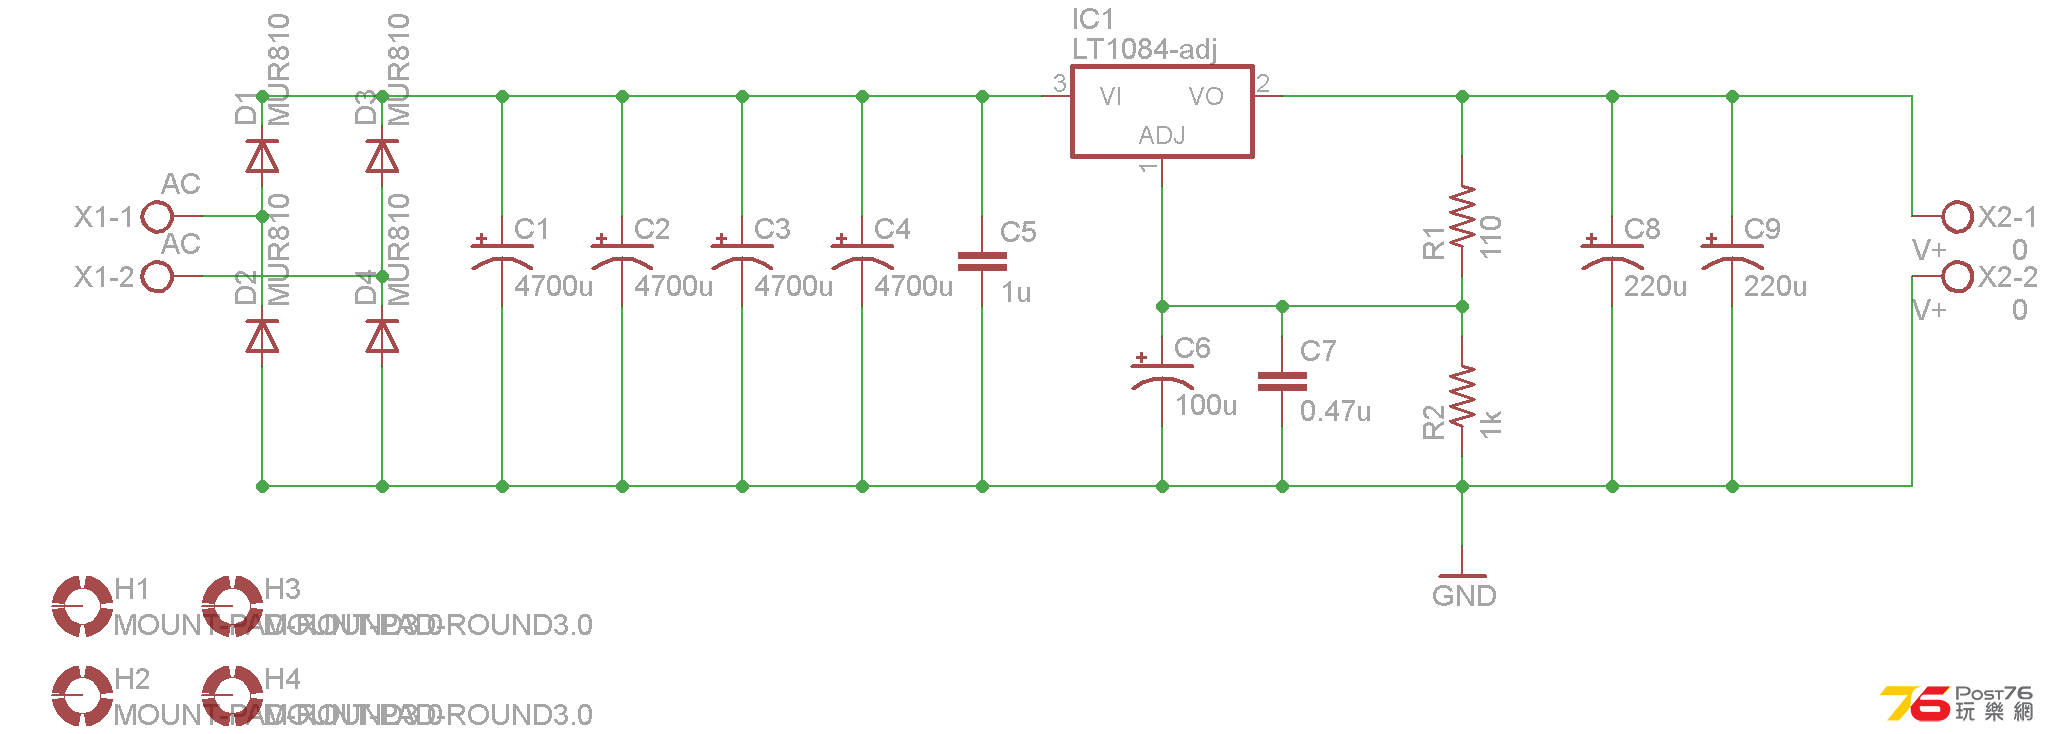 LT1083-small-schematic.png